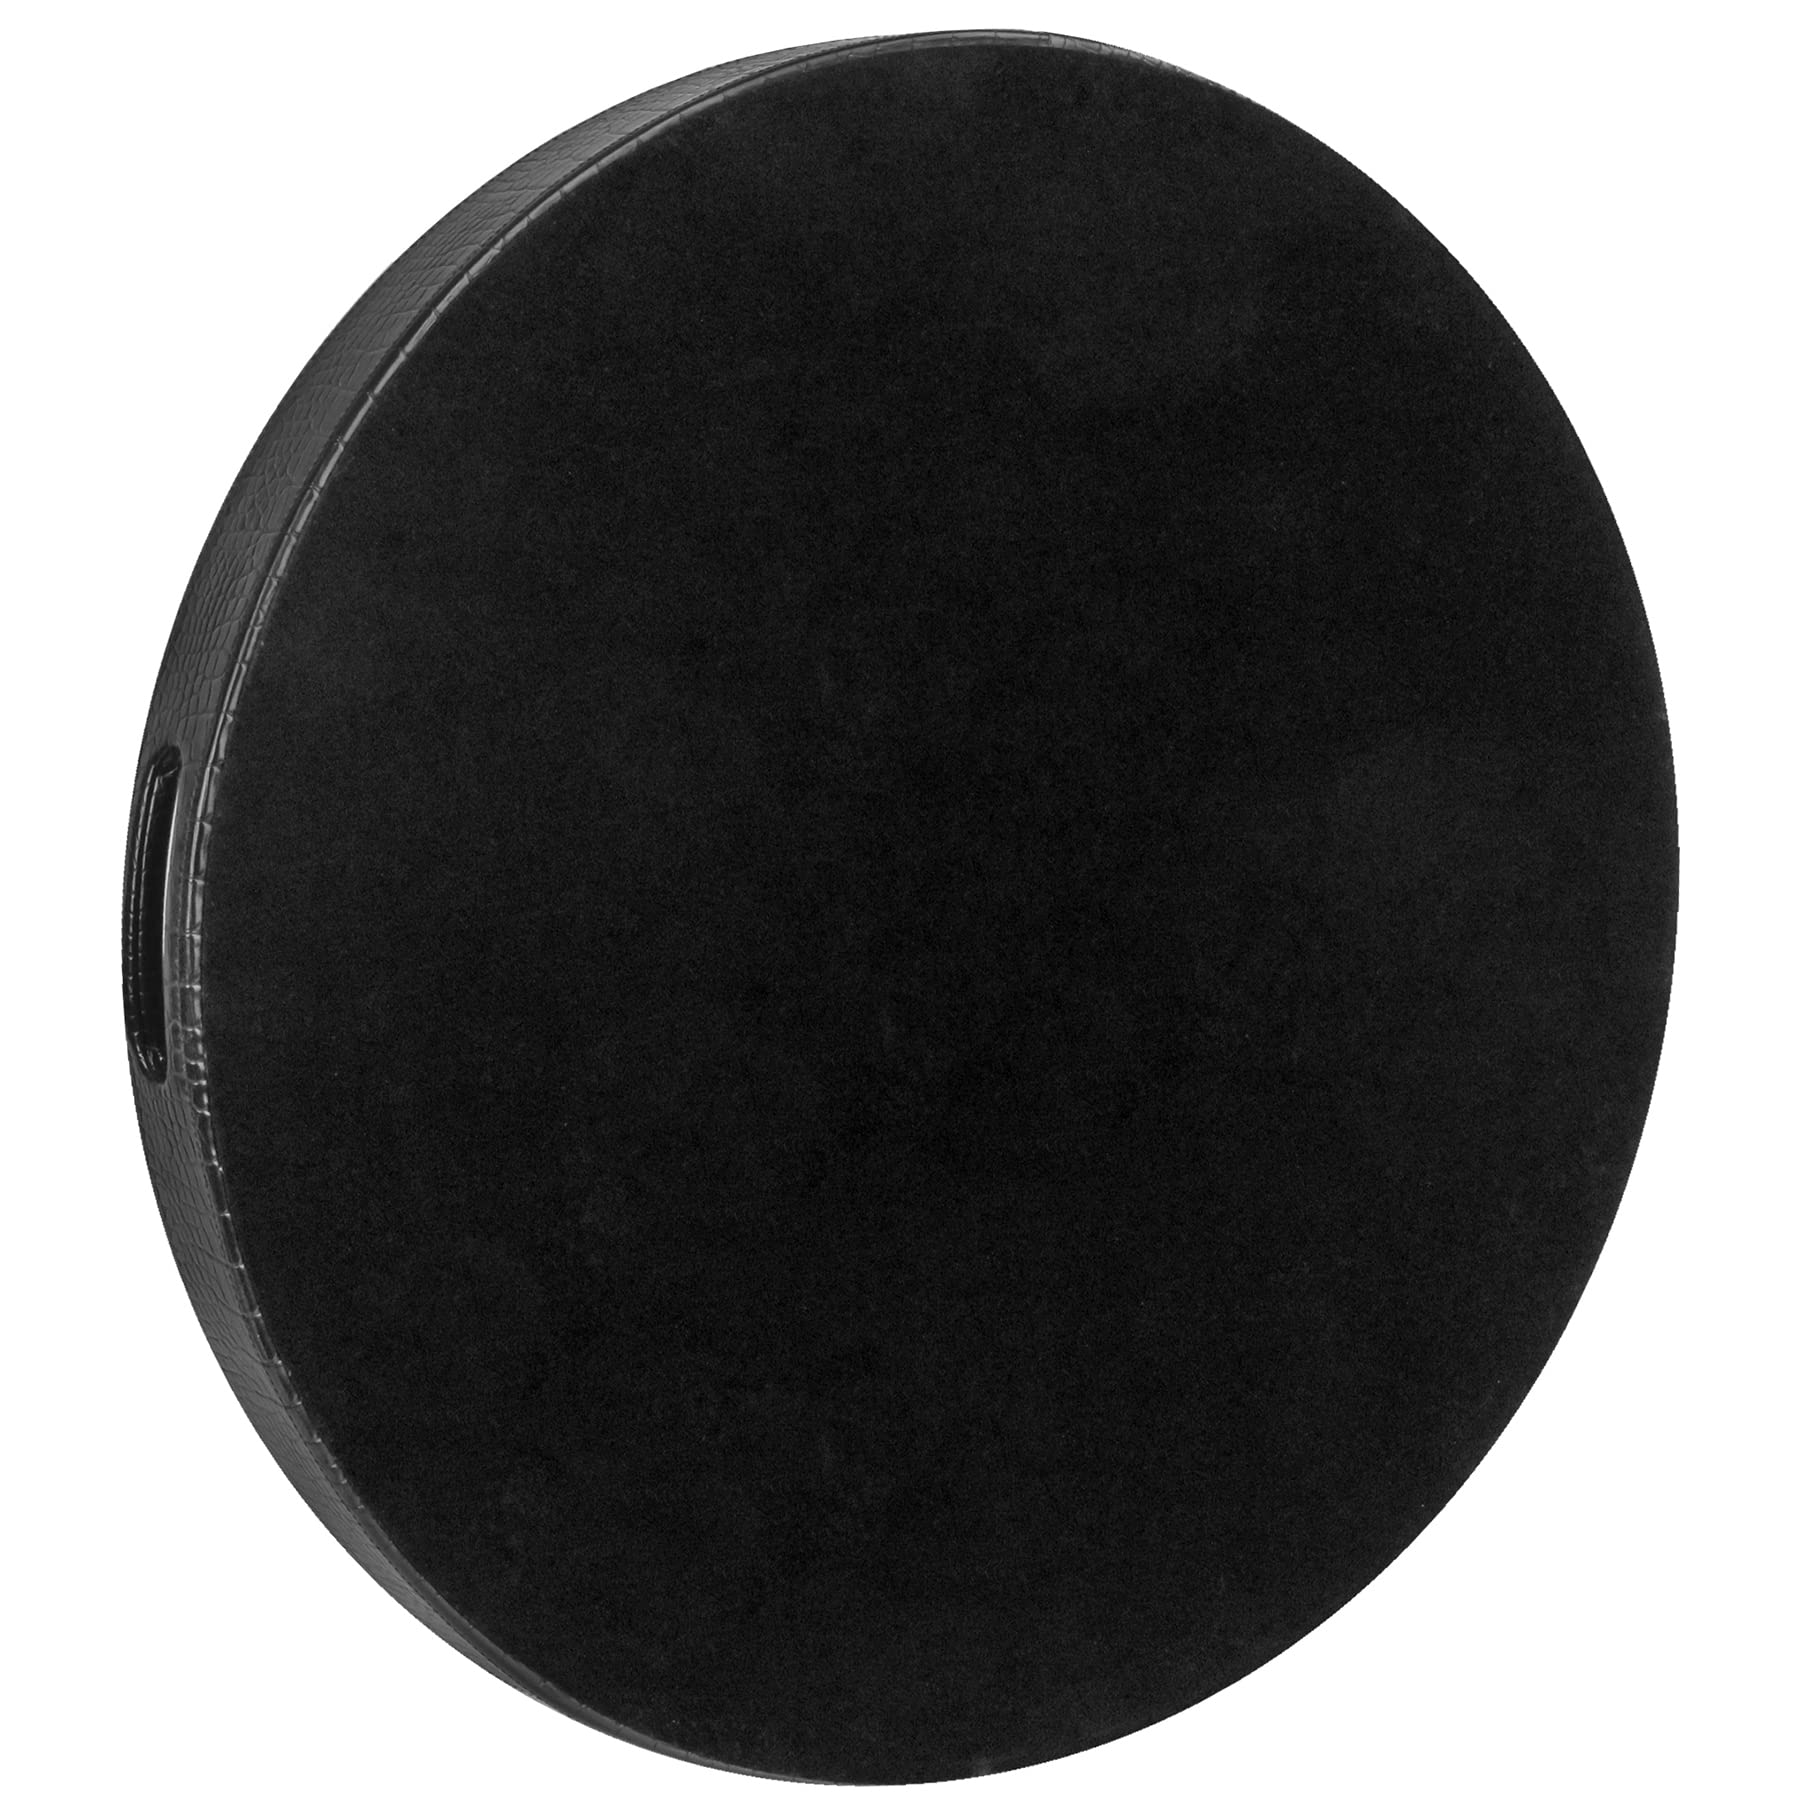 HofferRuffer Extra Large Round Serving Tray, Elegant Faux Leather Circle Ottoman Table Tray with Handles, Serve Tea, Coffee or Breakfast in Bed, Diameter 23.6 x 2.4 inches Height (Black)